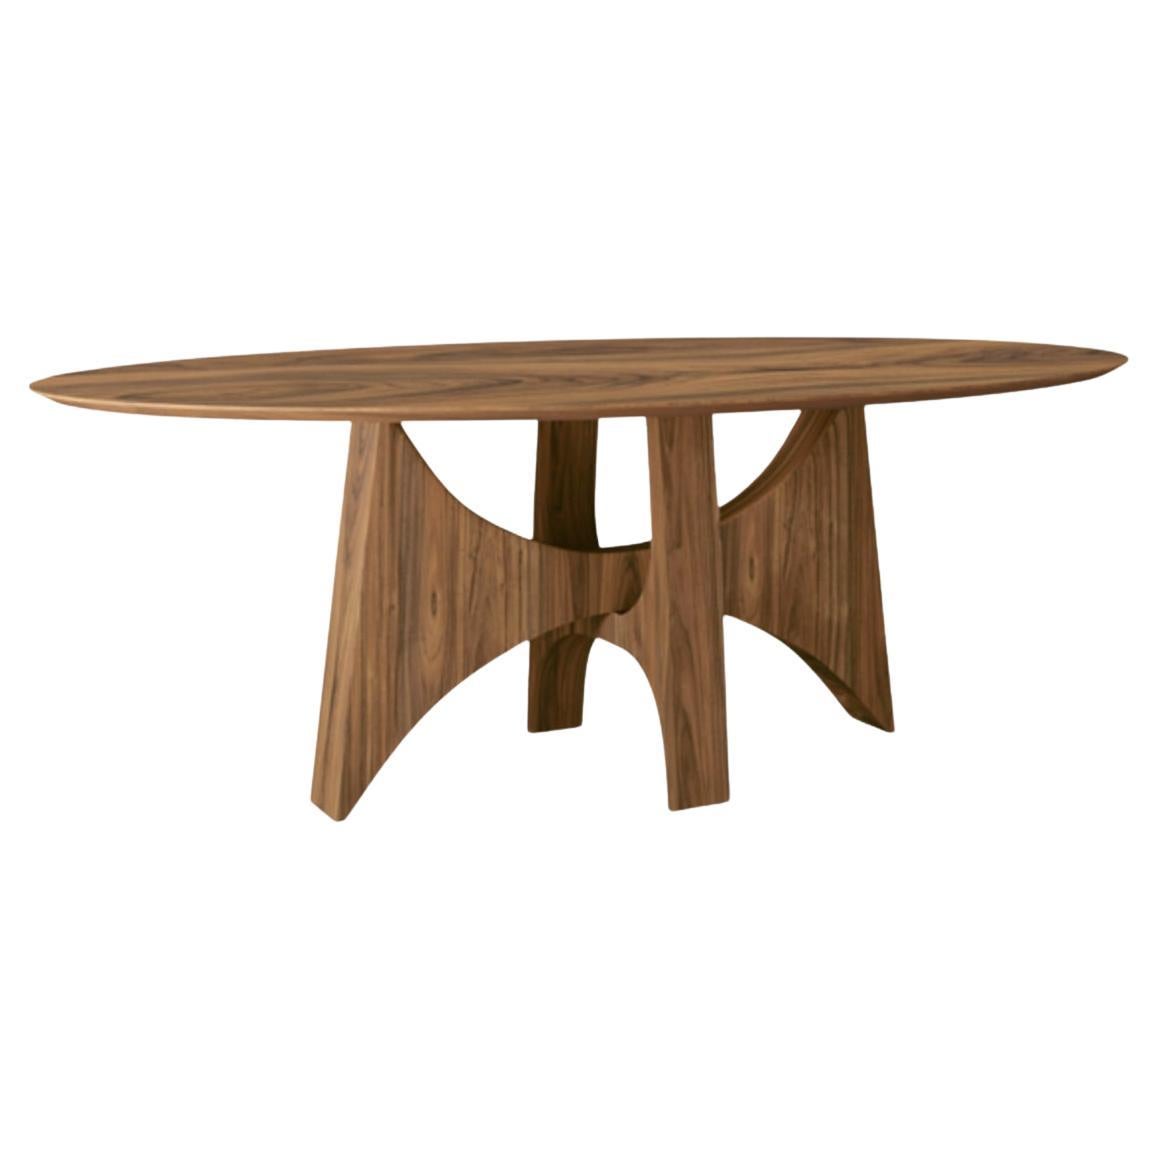 "Planalto" oval dining table in natural walnut wood